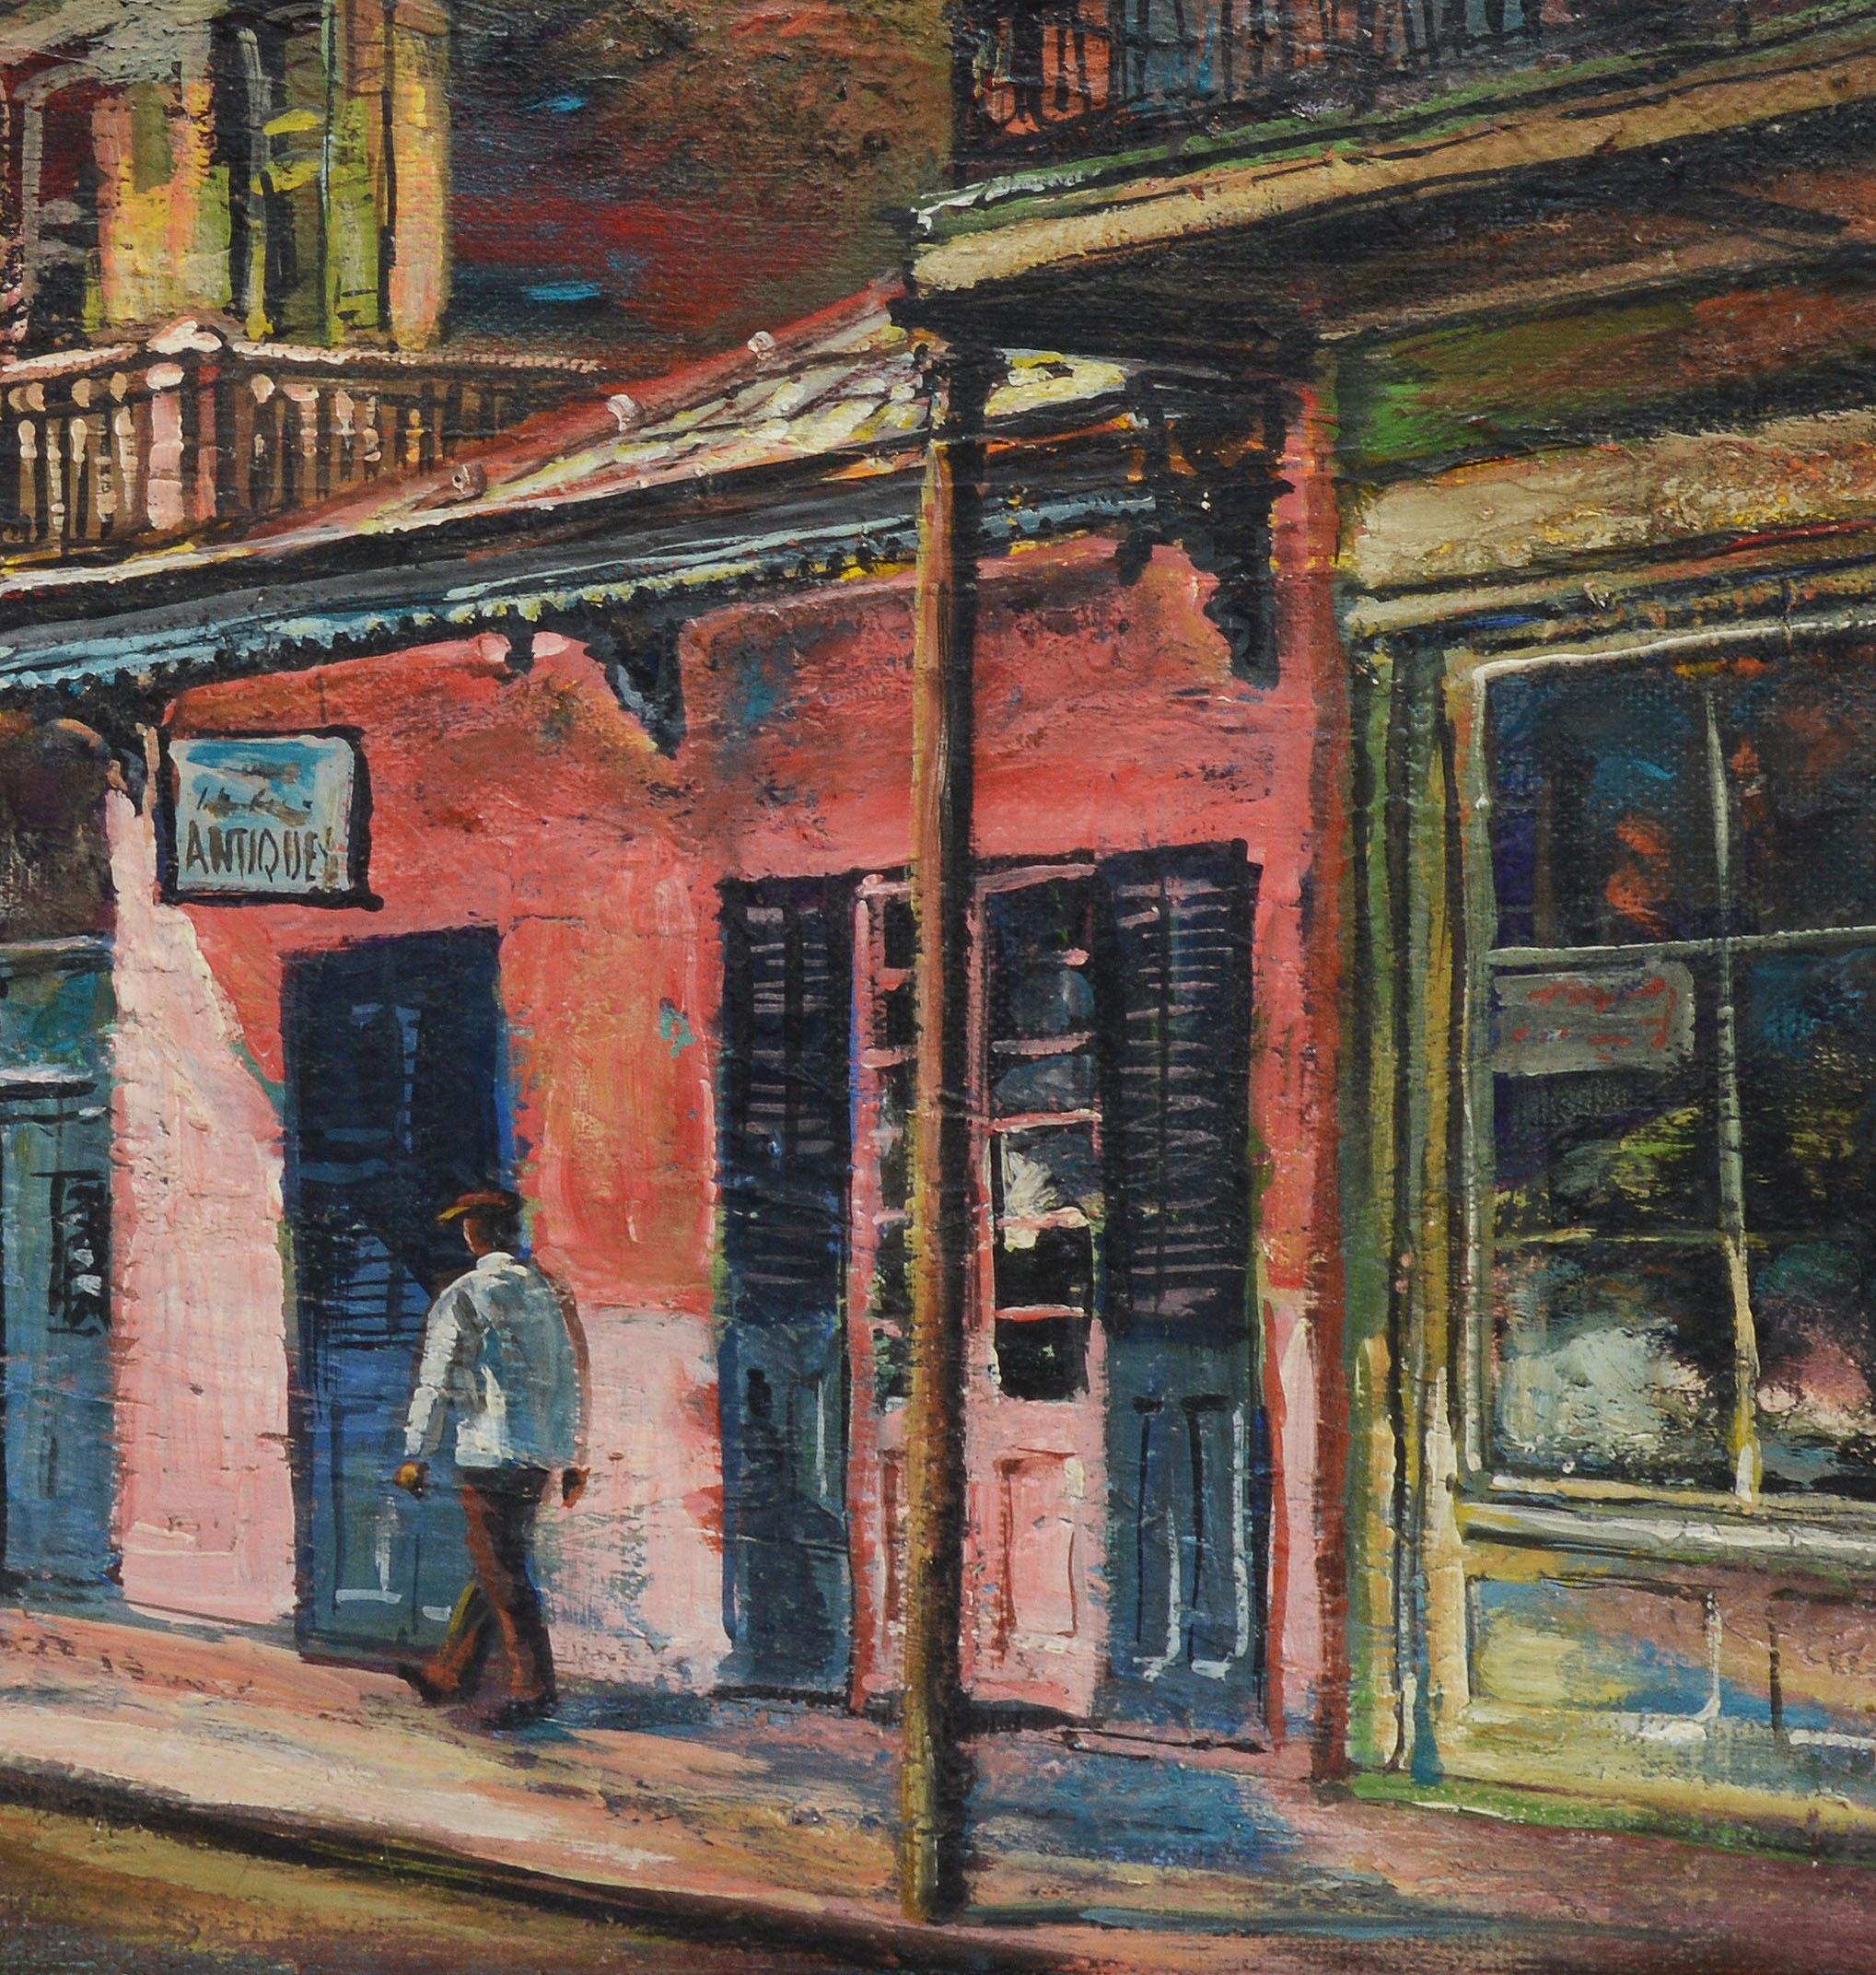 Modernist view of a New Orleans street by Rudolph Schmidt  (1897 - 1985).  Oil on board, circa 1940.  Signed.  Displayed in a period modernist frame.  Image size, 20